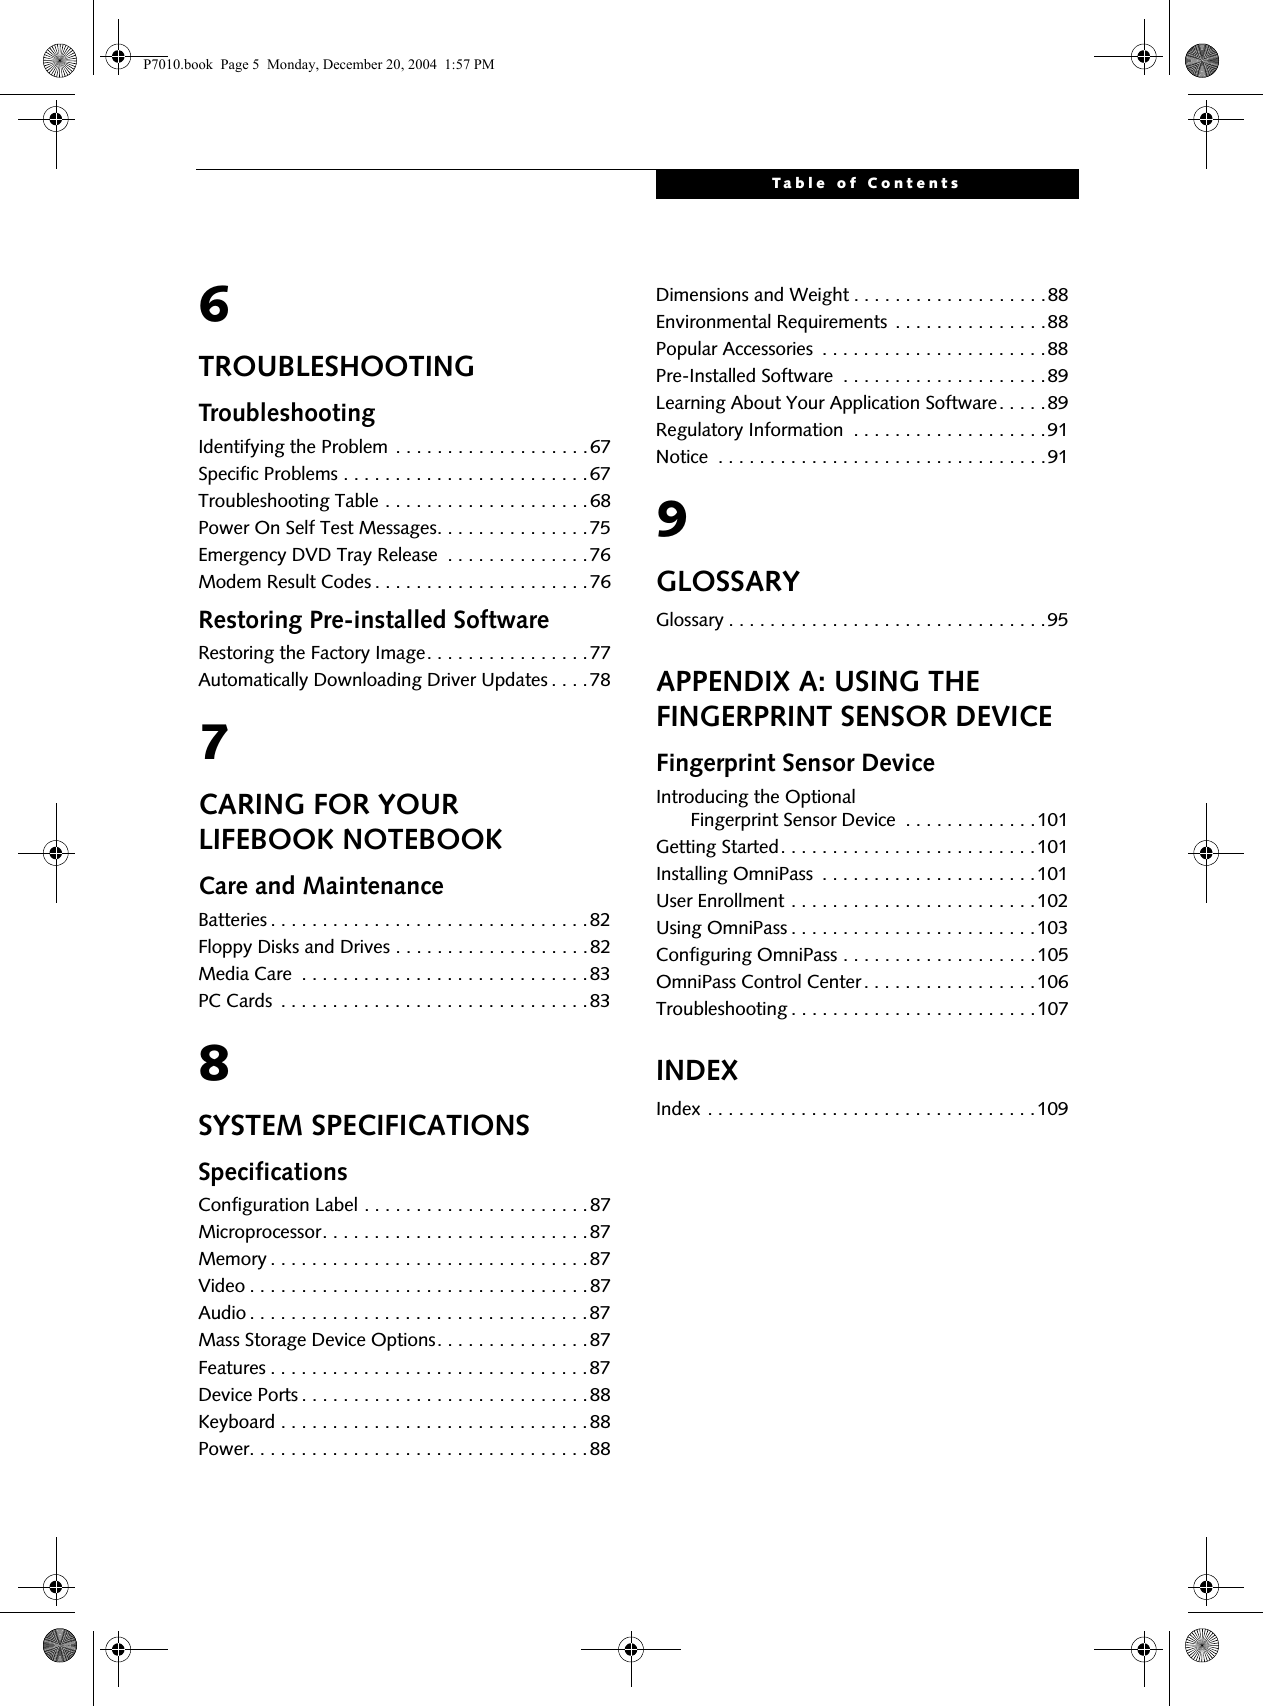 Table of Contents6TROUBLESHOOTINGTroubleshootingIdentifying the Problem . . . . . . . . . . . . . . . . . . .67Specific Problems . . . . . . . . . . . . . . . . . . . . . . . .67Troubleshooting Table . . . . . . . . . . . . . . . . . . . .68Power On Self Test Messages. . . . . . . . . . . . . . .75Emergency DVD Tray Release  . . . . . . . . . . . . . .76Modem Result Codes . . . . . . . . . . . . . . . . . . . . .76Restoring Pre-installed SoftwareRestoring the Factory Image. . . . . . . . . . . . . . . .77Automatically Downloading Driver Updates . . . .787CARING FOR YOUR LIFEBOOK NOTEBOOKCare and MaintenanceBatteries . . . . . . . . . . . . . . . . . . . . . . . . . . . . . . .82Floppy Disks and Drives . . . . . . . . . . . . . . . . . . .82Media Care  . . . . . . . . . . . . . . . . . . . . . . . . . . . .83PC Cards  . . . . . . . . . . . . . . . . . . . . . . . . . . . . . .838SYSTEM SPECIFICATIONSSpecificationsConfiguration Label . . . . . . . . . . . . . . . . . . . . . .87Microprocessor. . . . . . . . . . . . . . . . . . . . . . . . . .87Memory . . . . . . . . . . . . . . . . . . . . . . . . . . . . . . .87Video . . . . . . . . . . . . . . . . . . . . . . . . . . . . . . . . .87Audio . . . . . . . . . . . . . . . . . . . . . . . . . . . . . . . . .87Mass Storage Device Options. . . . . . . . . . . . . . .87Features . . . . . . . . . . . . . . . . . . . . . . . . . . . . . . .87Device Ports . . . . . . . . . . . . . . . . . . . . . . . . . . . .88Keyboard . . . . . . . . . . . . . . . . . . . . . . . . . . . . . .88Power. . . . . . . . . . . . . . . . . . . . . . . . . . . . . . . . .88Dimensions and Weight . . . . . . . . . . . . . . . . . . .88Environmental Requirements . . . . . . . . . . . . . . .88Popular Accessories  . . . . . . . . . . . . . . . . . . . . . .88Pre-Installed Software  . . . . . . . . . . . . . . . . . . . .89Learning About Your Application Software. . . . .89Regulatory Information  . . . . . . . . . . . . . . . . . . .91Notice  . . . . . . . . . . . . . . . . . . . . . . . . . . . . . . . .919GLOSSARYGlossary . . . . . . . . . . . . . . . . . . . . . . . . . . . . . . .95APPENDIX A: USING THE FINGERPRINT SENSOR DEVICEFingerprint Sensor DeviceIntroducing the Optional      Fingerprint Sensor Device  . . . . . . . . . . . . .101Getting Started. . . . . . . . . . . . . . . . . . . . . . . . .101Installing OmniPass  . . . . . . . . . . . . . . . . . . . . .101User Enrollment . . . . . . . . . . . . . . . . . . . . . . . .102Using OmniPass . . . . . . . . . . . . . . . . . . . . . . . .103Configuring OmniPass . . . . . . . . . . . . . . . . . . .105OmniPass Control Center. . . . . . . . . . . . . . . . .106Troubleshooting . . . . . . . . . . . . . . . . . . . . . . . .107INDEXIndex . . . . . . . . . . . . . . . . . . . . . . . . . . . . . . . .109P7010.book  Page 5  Monday, December 20, 2004  1:57 PM